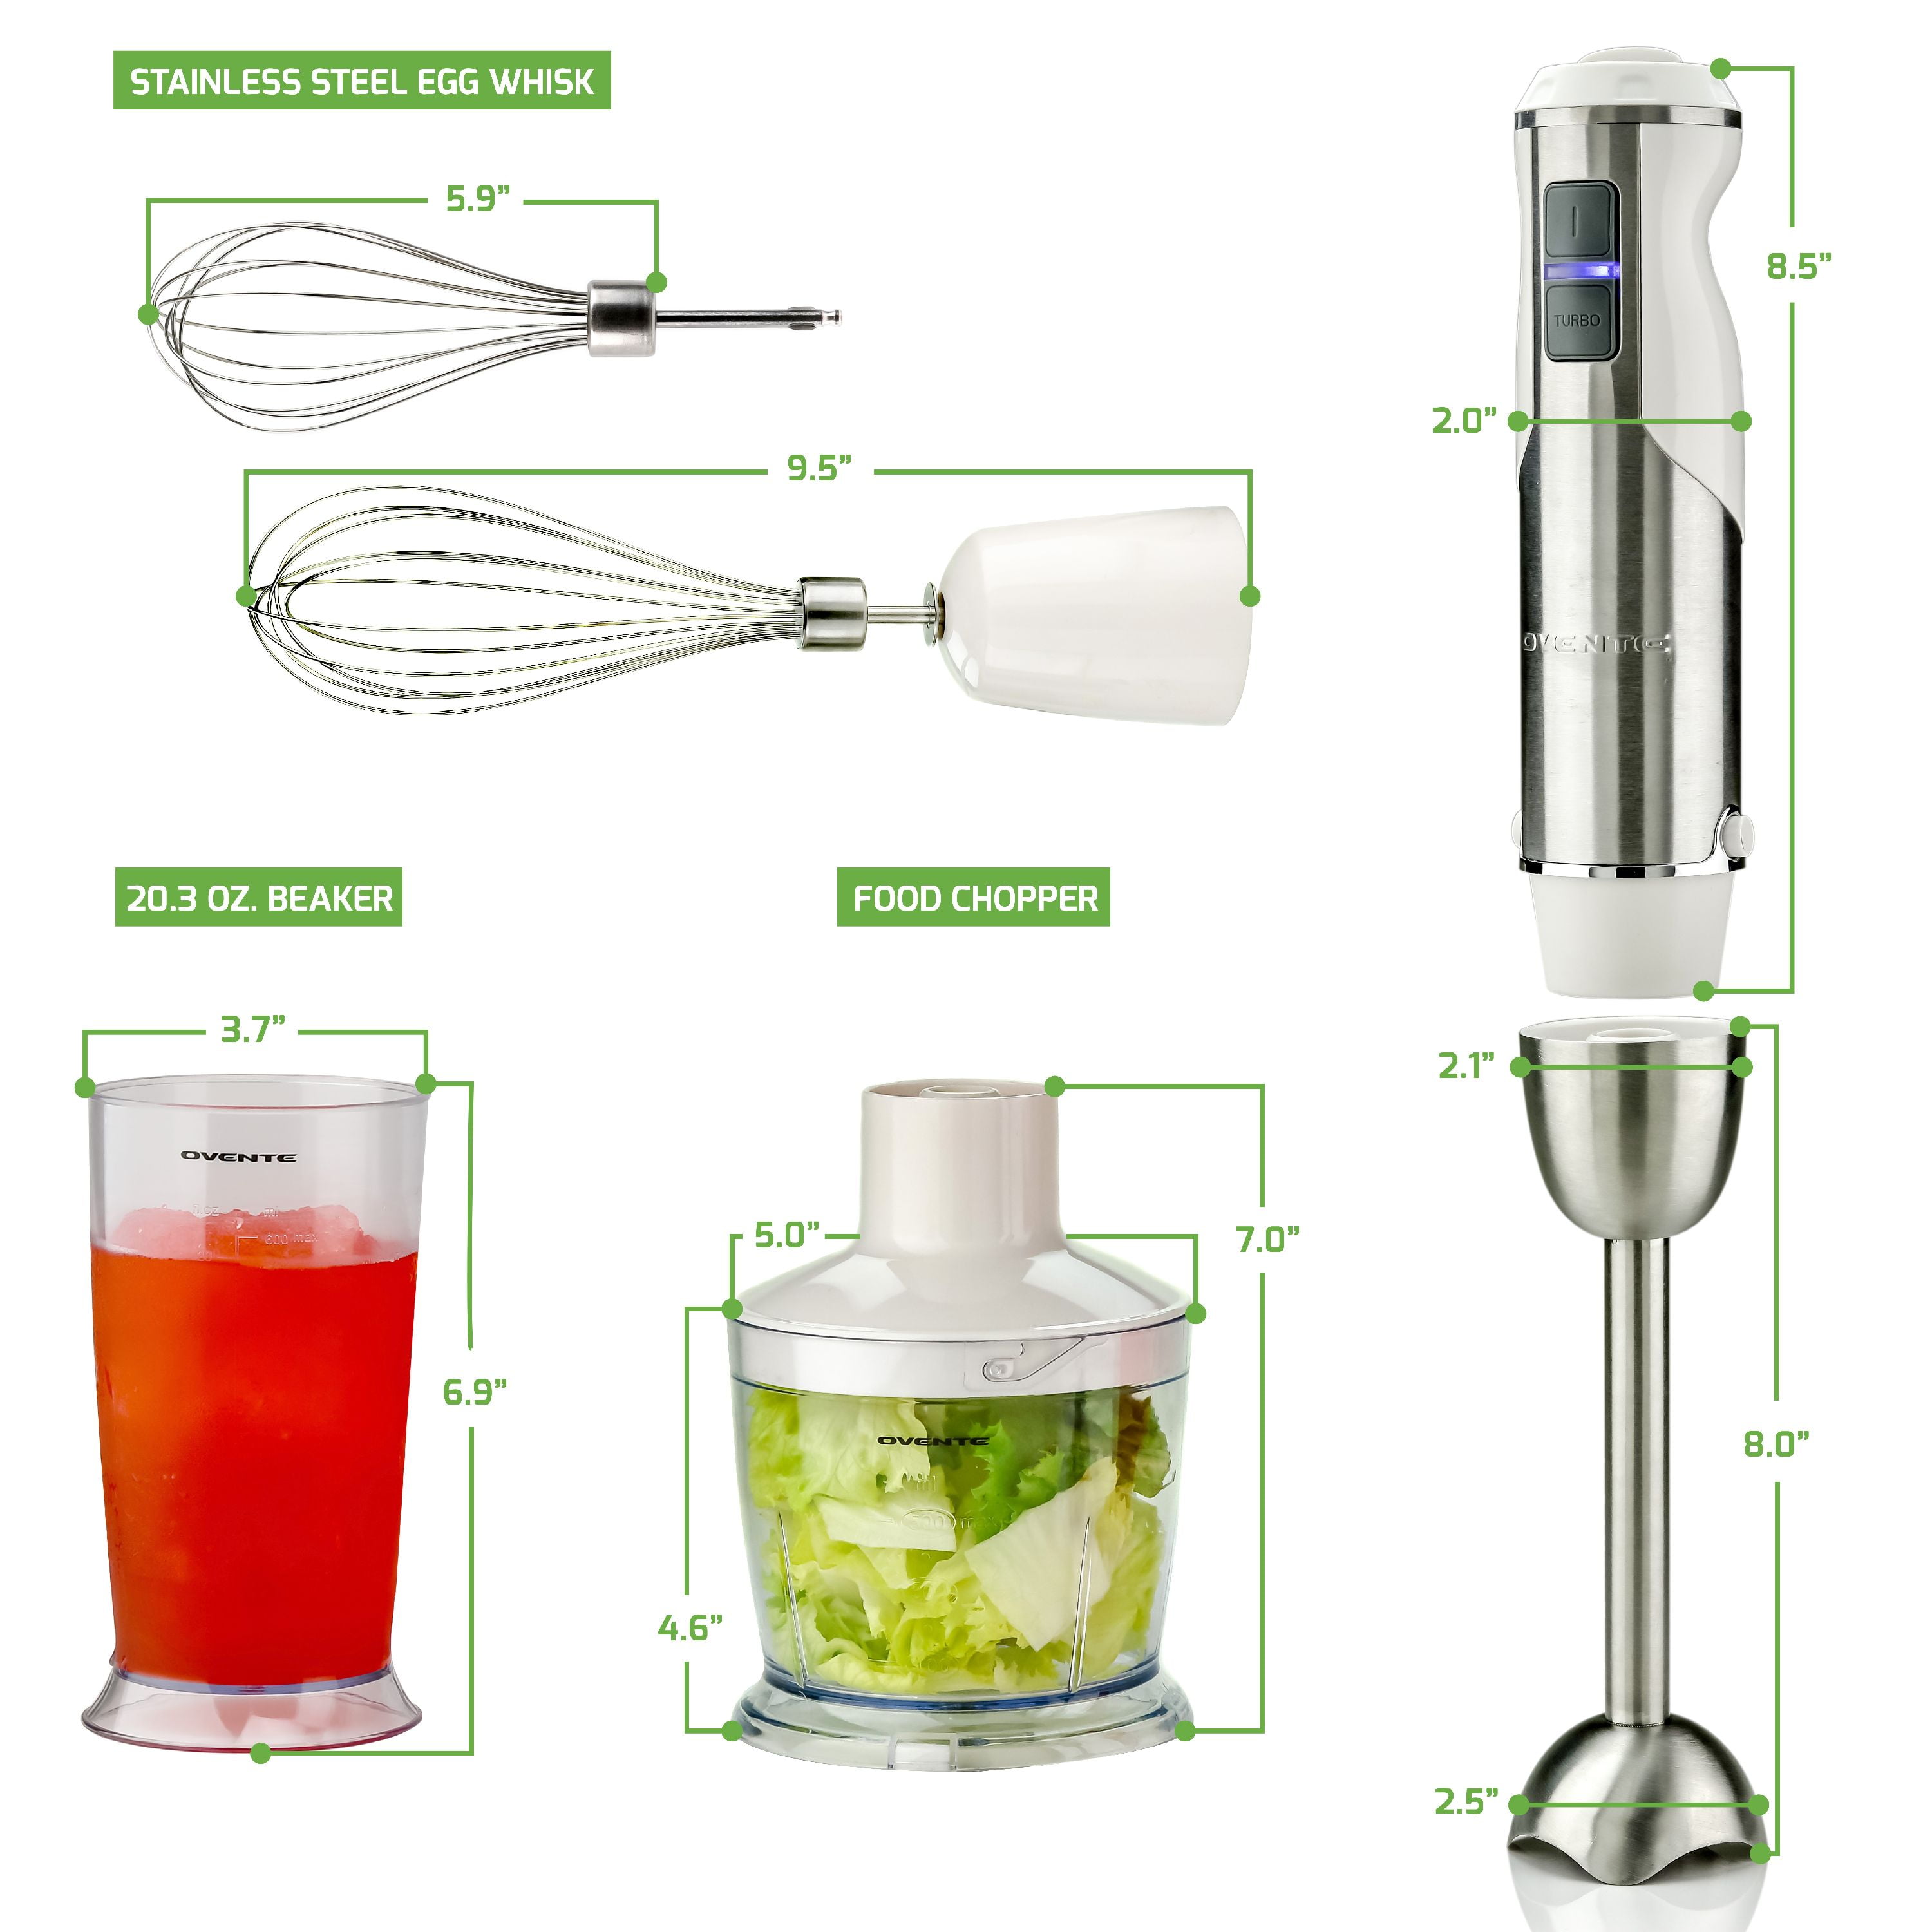 Ovente Multi-Purpose Immersion Hand Blender Set 500-Watts, 6-Speed Variable  Control Stainless Steel Includes Food Chopper, Egg Whisk, and BPA-Free  Beaker (600ml) White (HS665W)